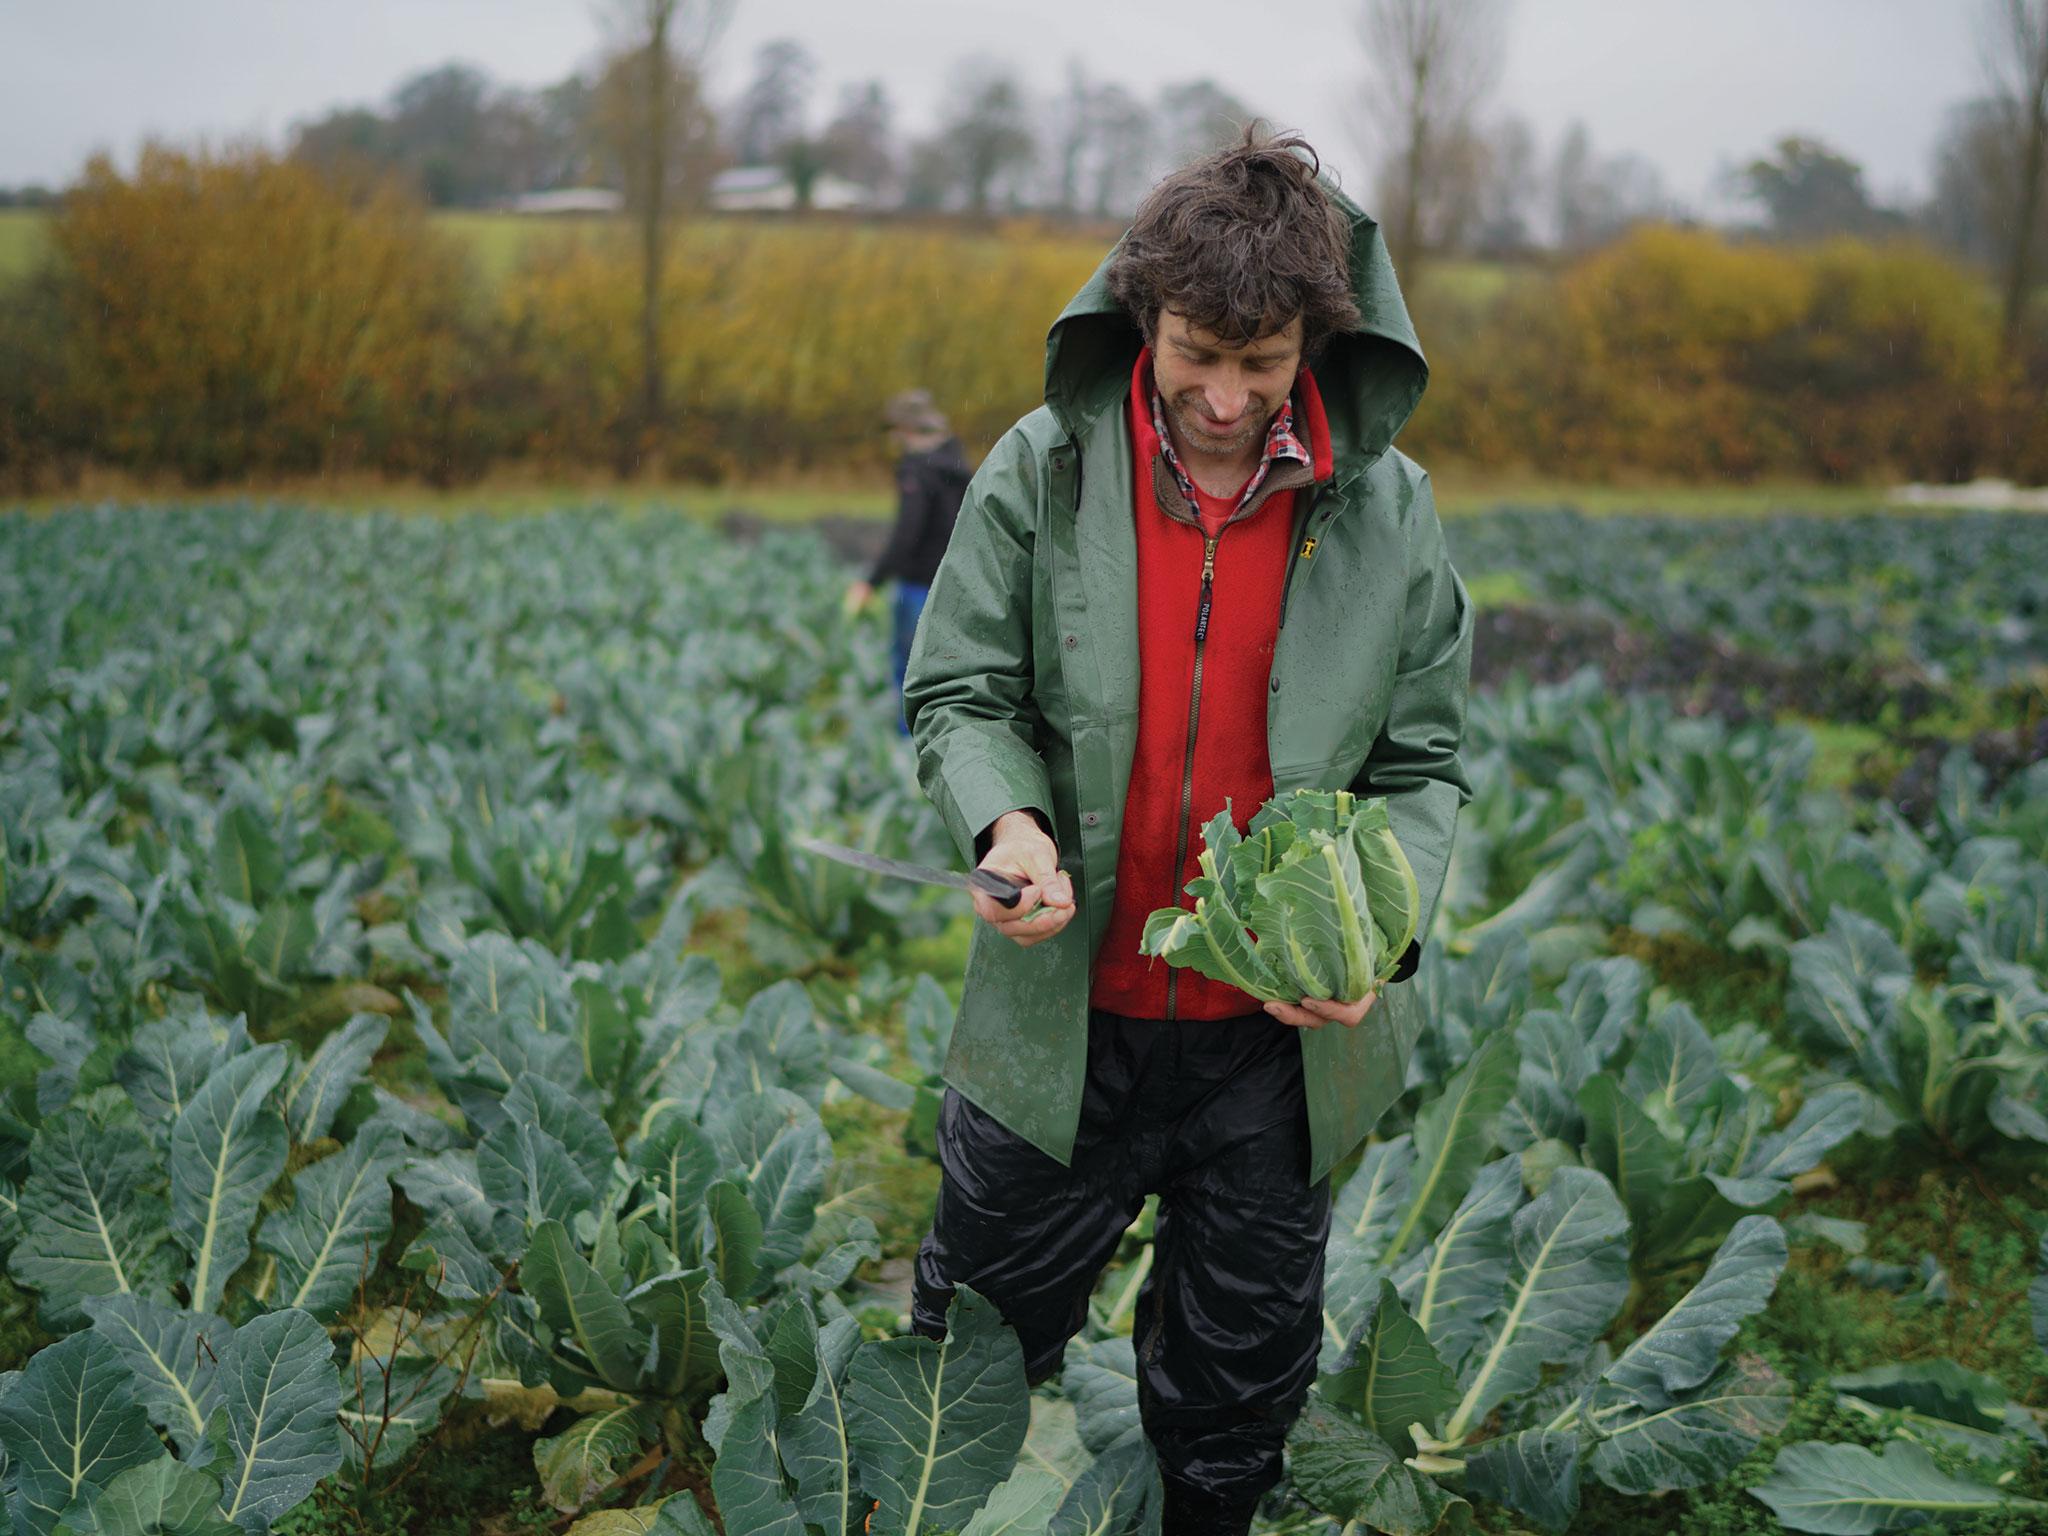 Purton House is an award-winning organic farm set over 70 acres of Wiltshire countryside. They sell their fruit, veg, beef, pork and eggs to Londoners via Farmdrop